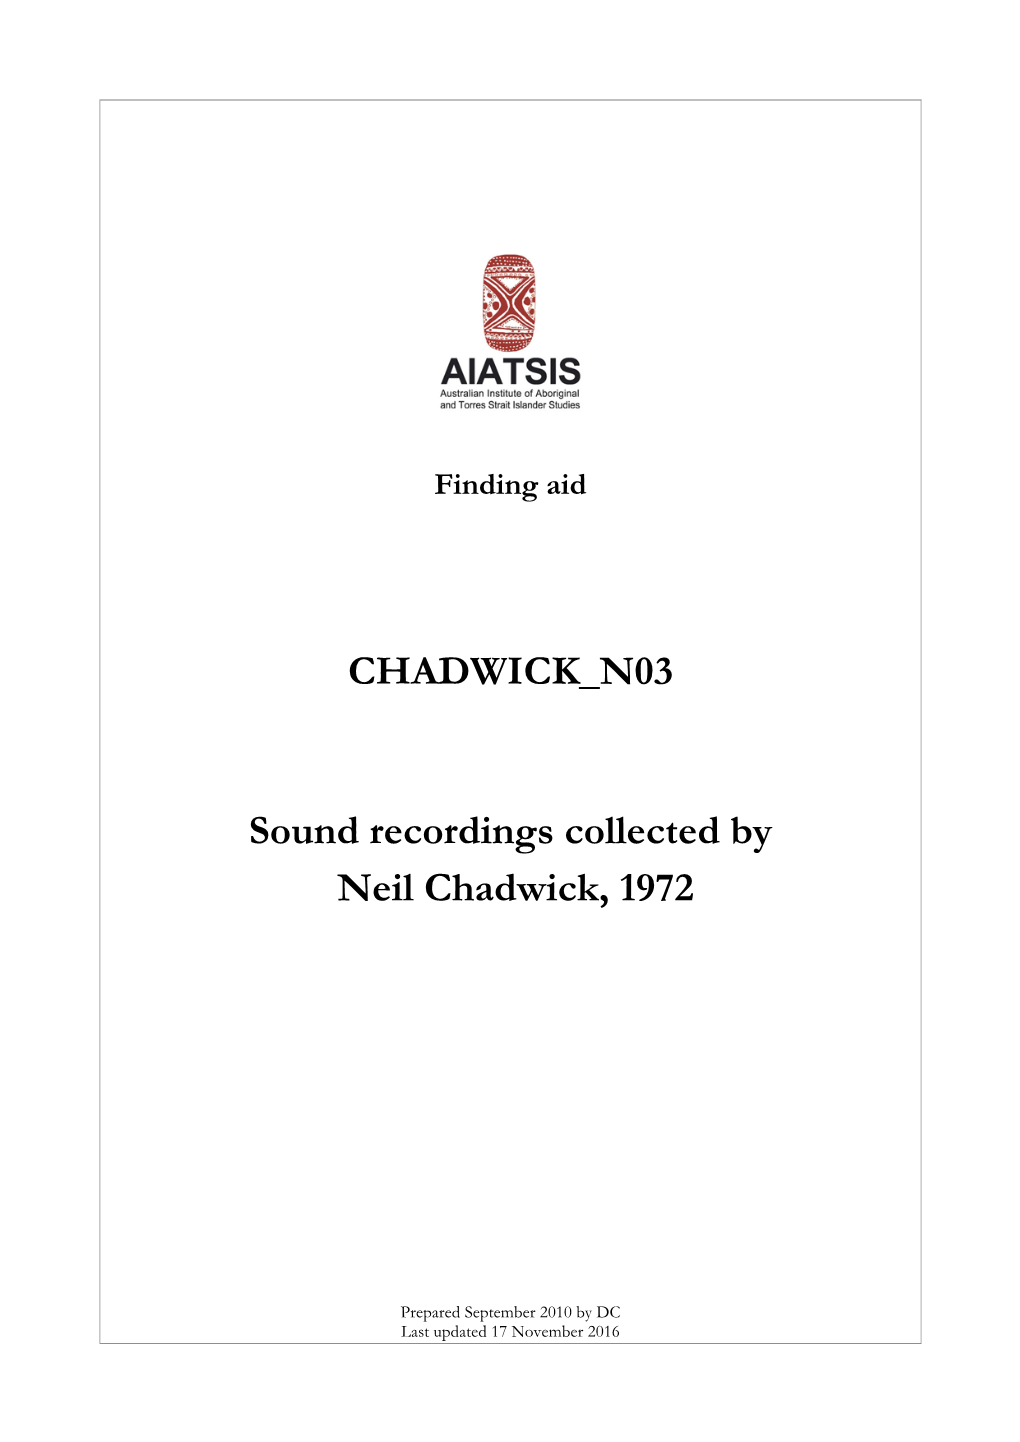 Guide to Sound Recordings Colloected by Neil Chadwick, 1972